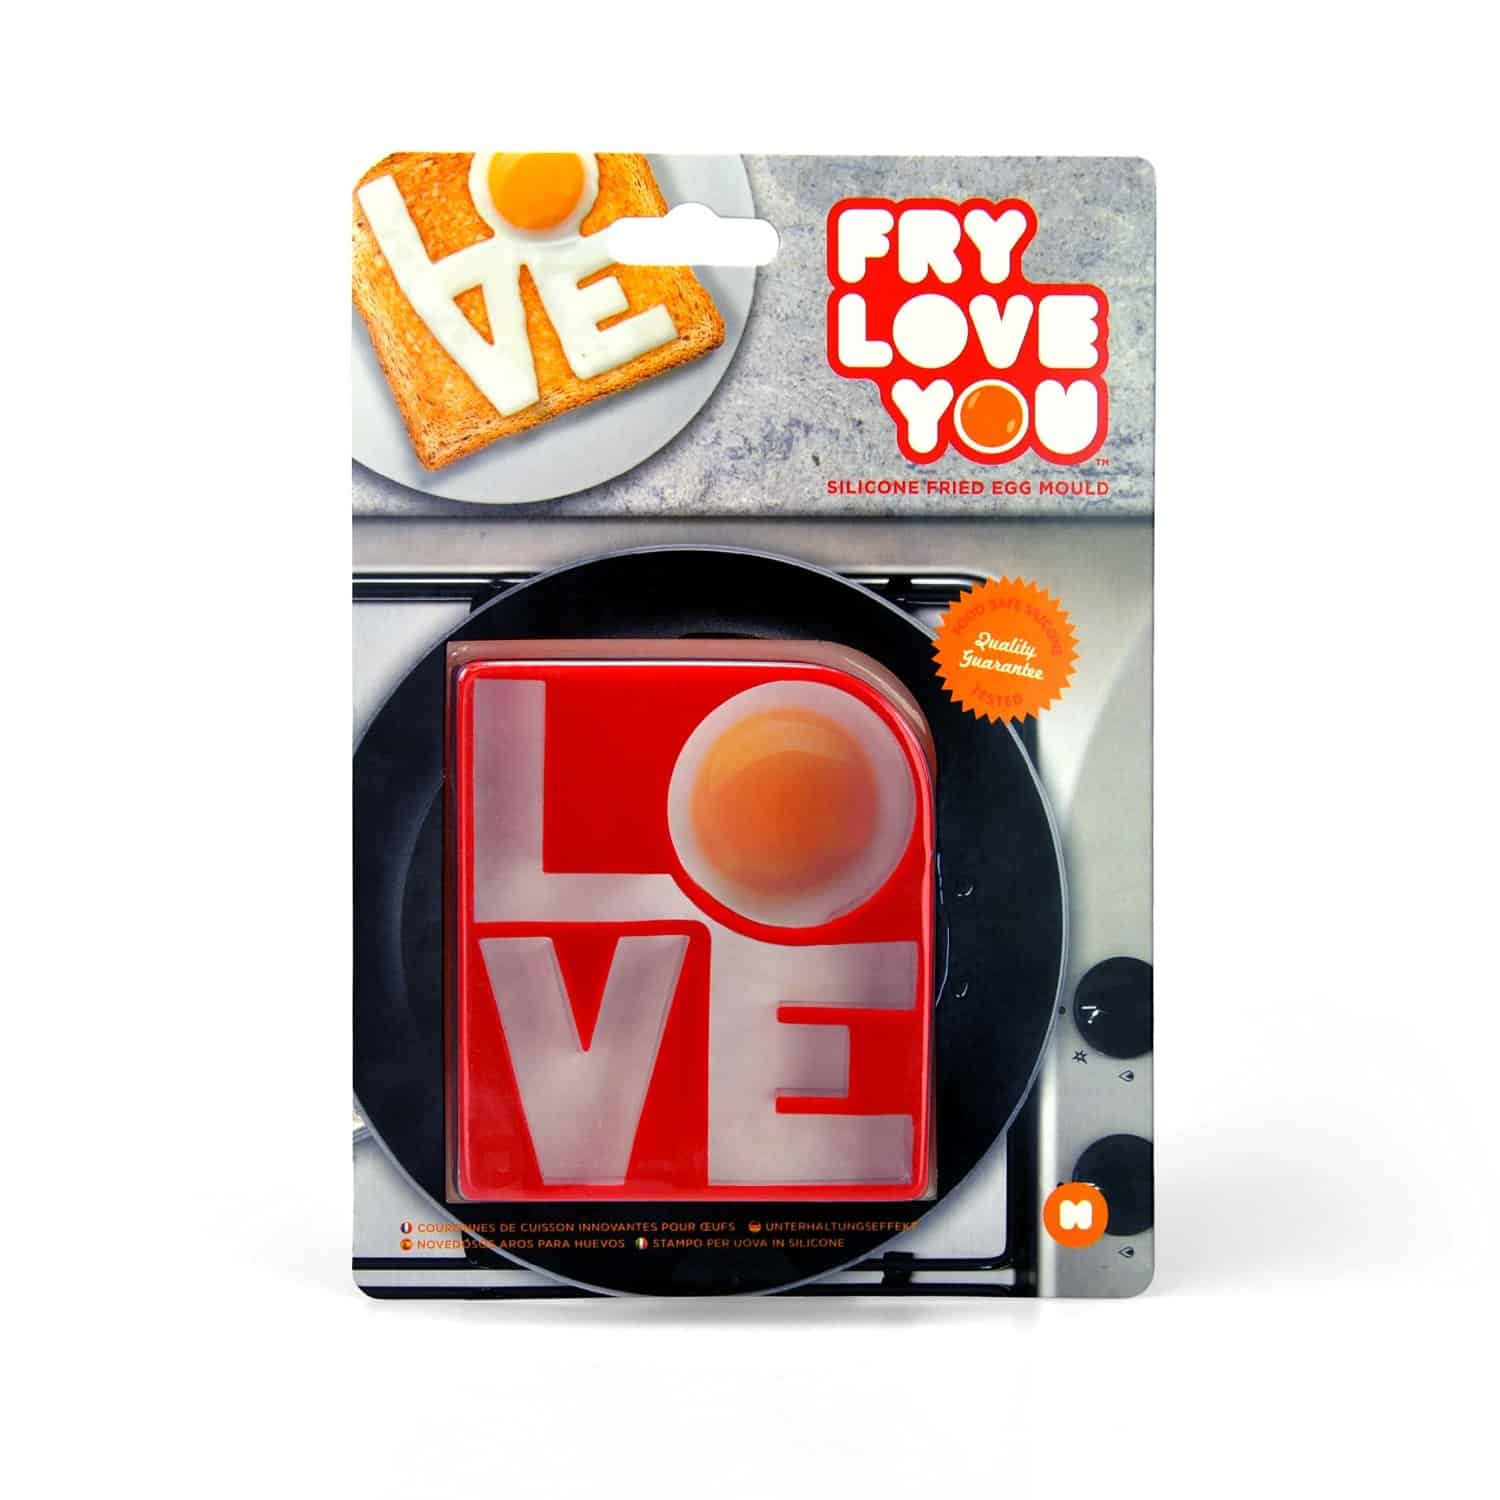 Mustard Fry Love You Egg Mold Quirky Novelty Product